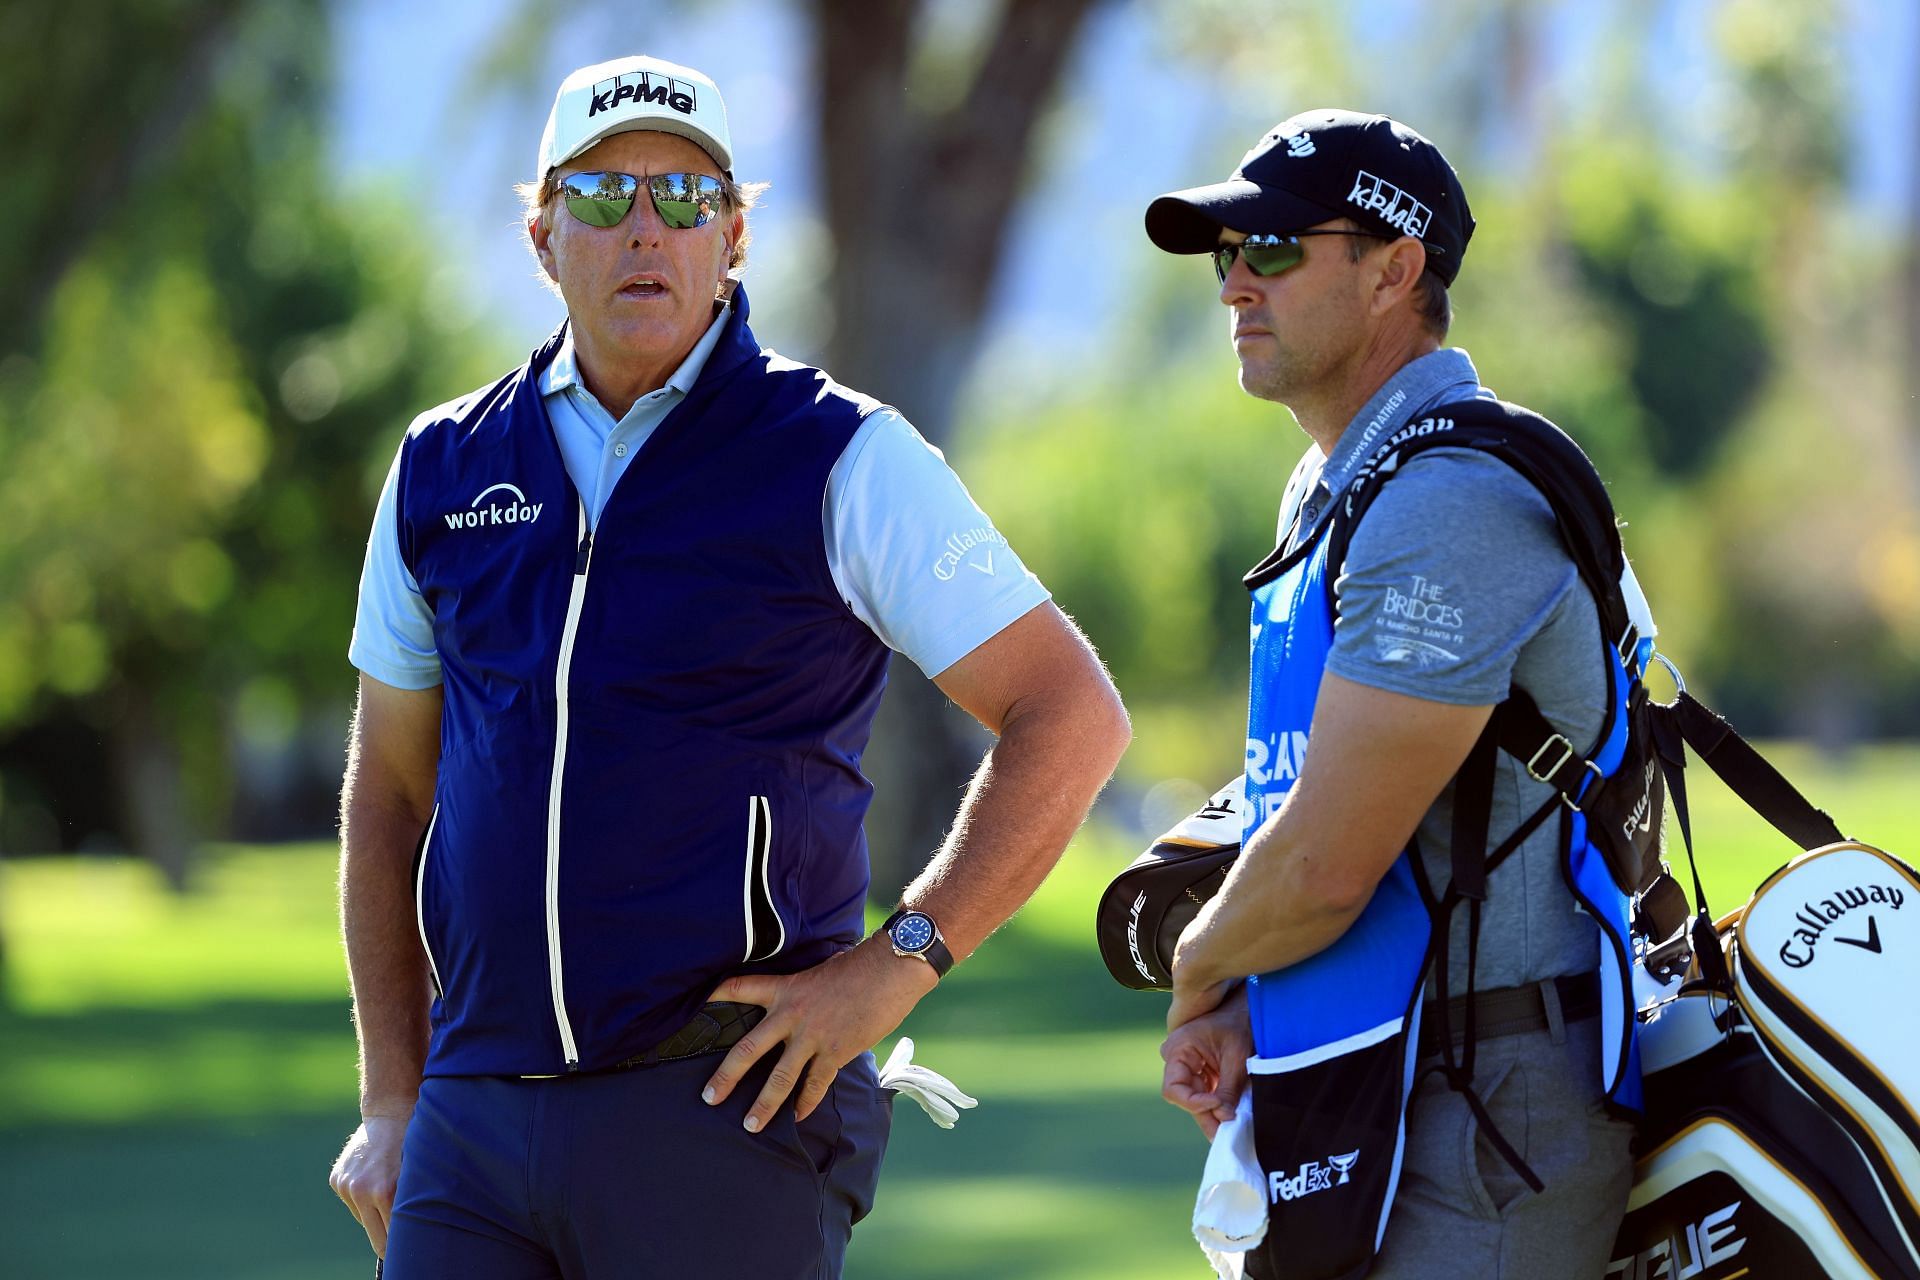 Phil Mickelson and caddy-brother Tim Mickelson at The American Express - Round One (Image via Sam Greenwood/Getty Images)